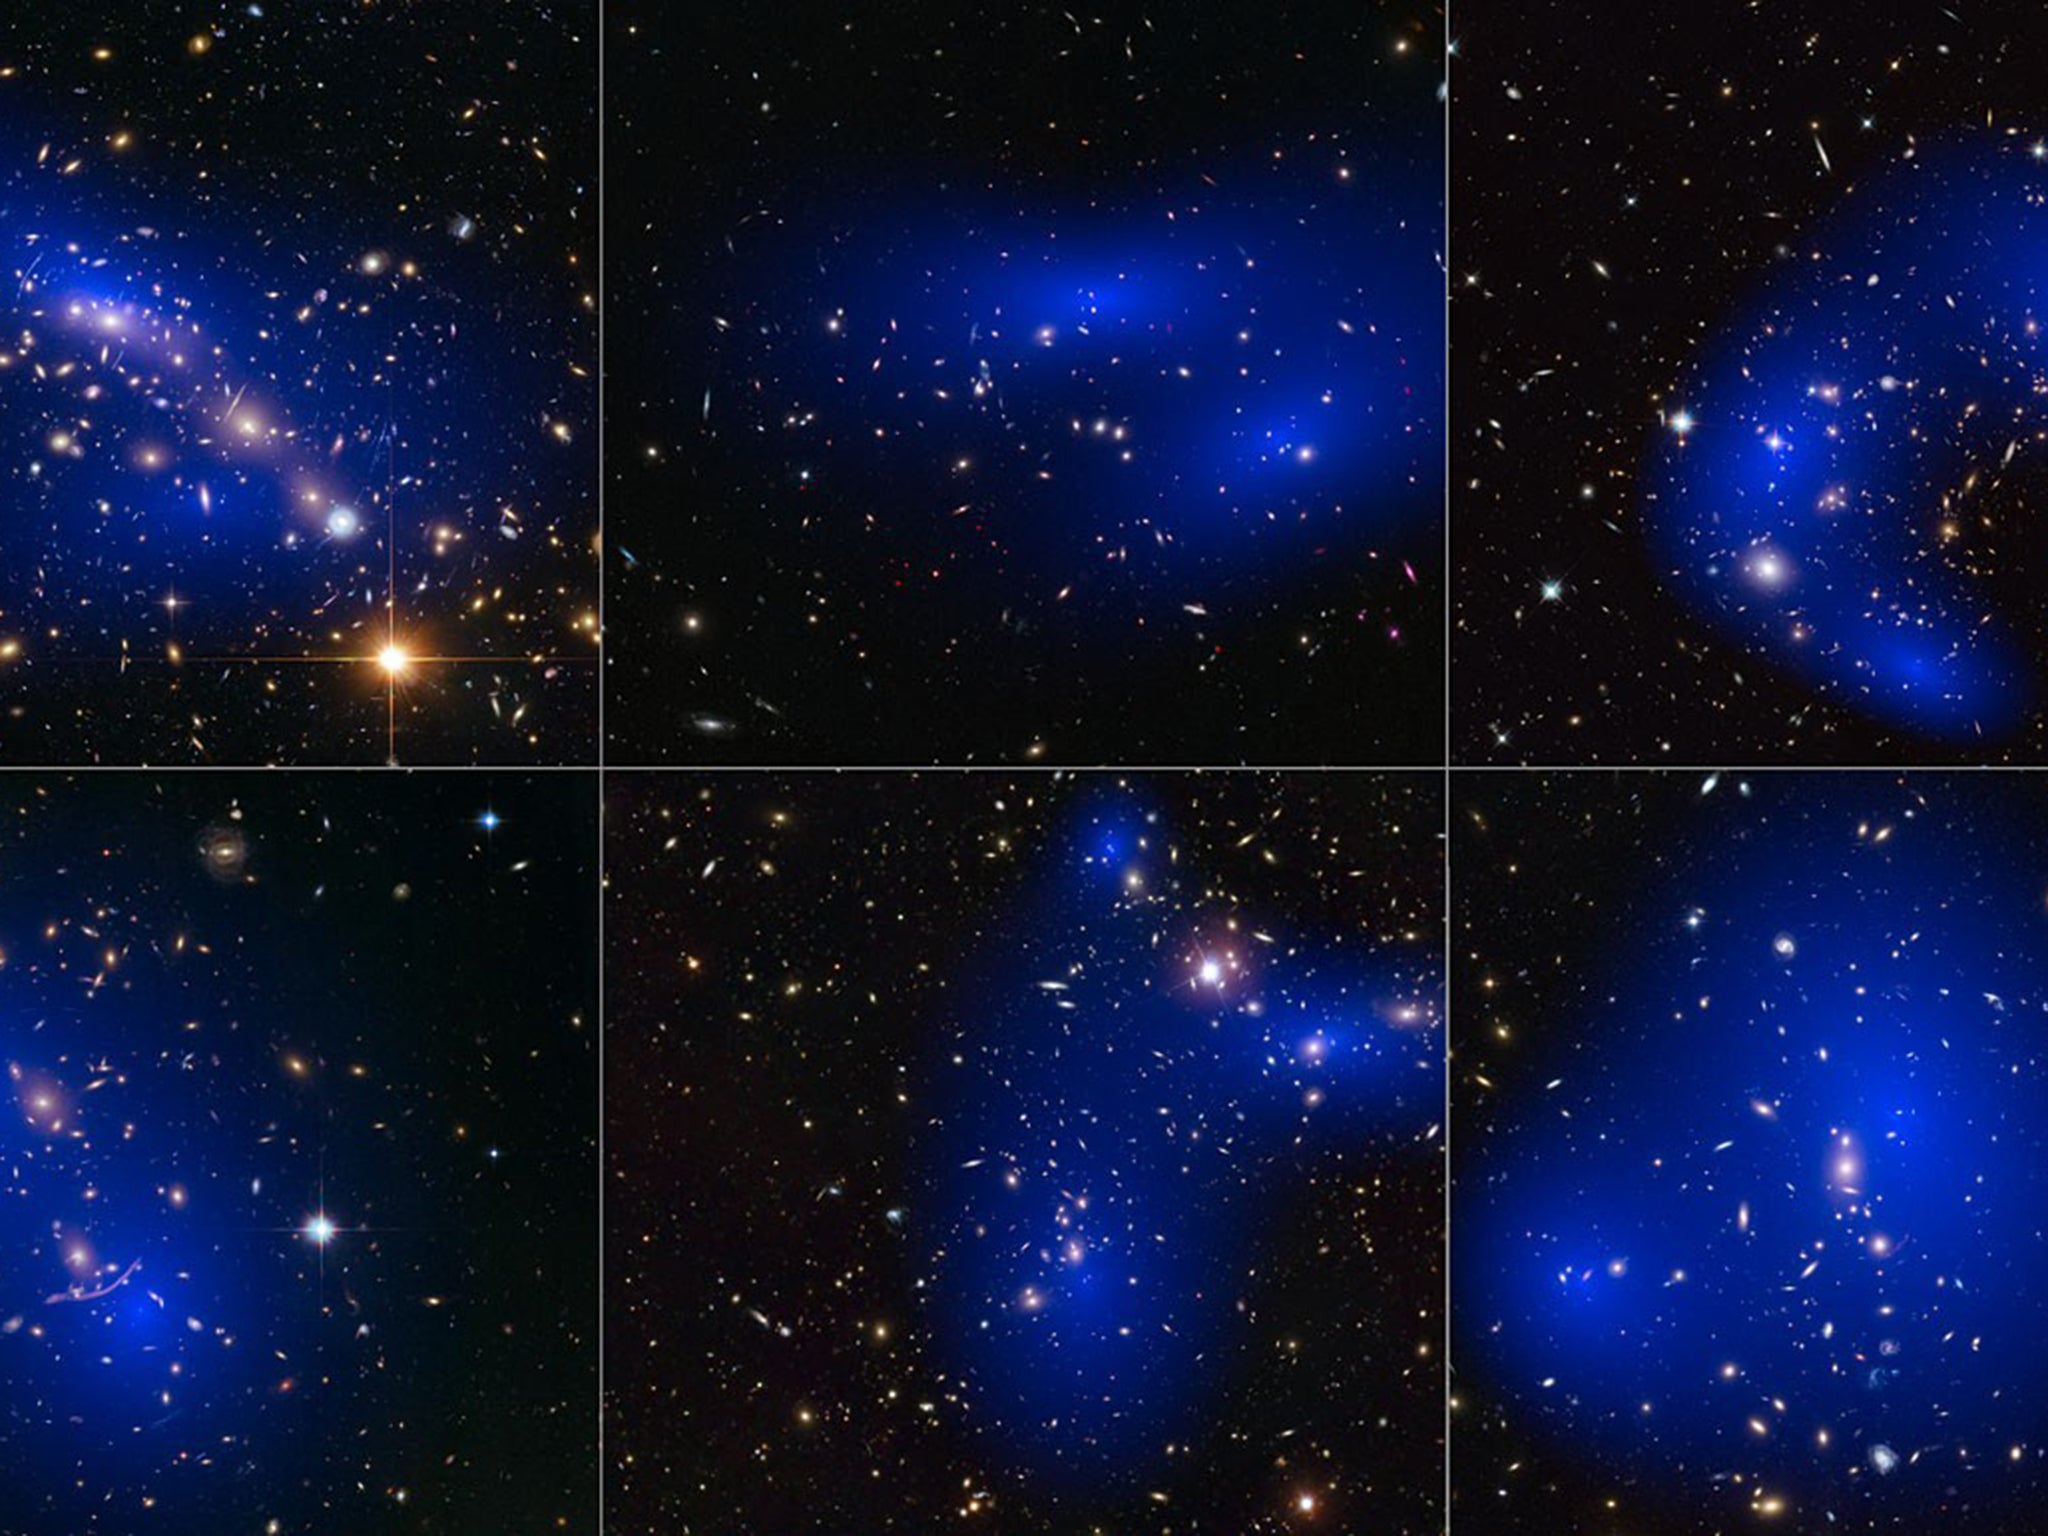 The Nasa/Esa Hubble’s images of six galaxy clusters
which were observed to study how dark matter behaves when the clusters collide